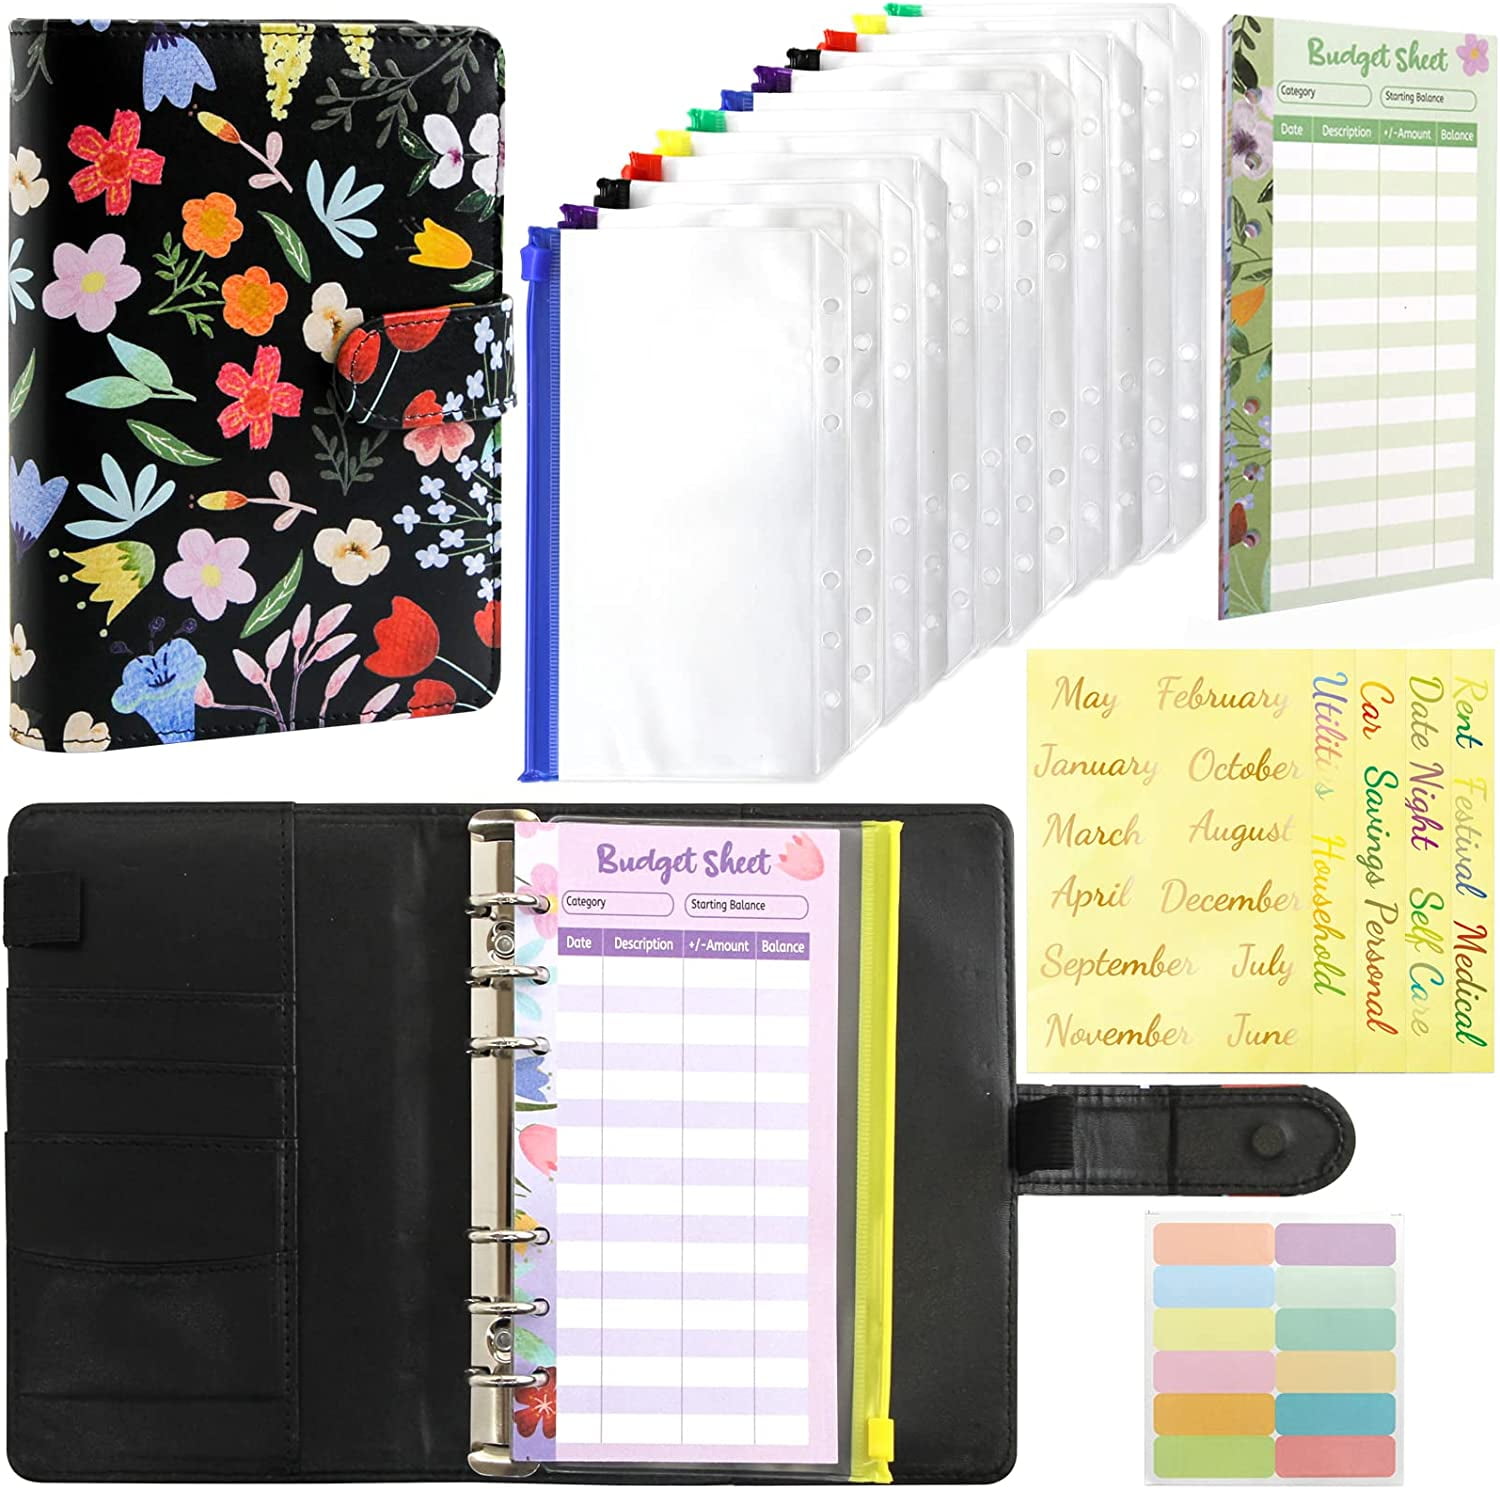 SOUL MAMA A6 Cash Envelopes for Budgeting Binder - 12 Pcs Floral Themed  Budget Inserts, Pockets with 6 Holes, Money Saving Envelopes, Stuffing